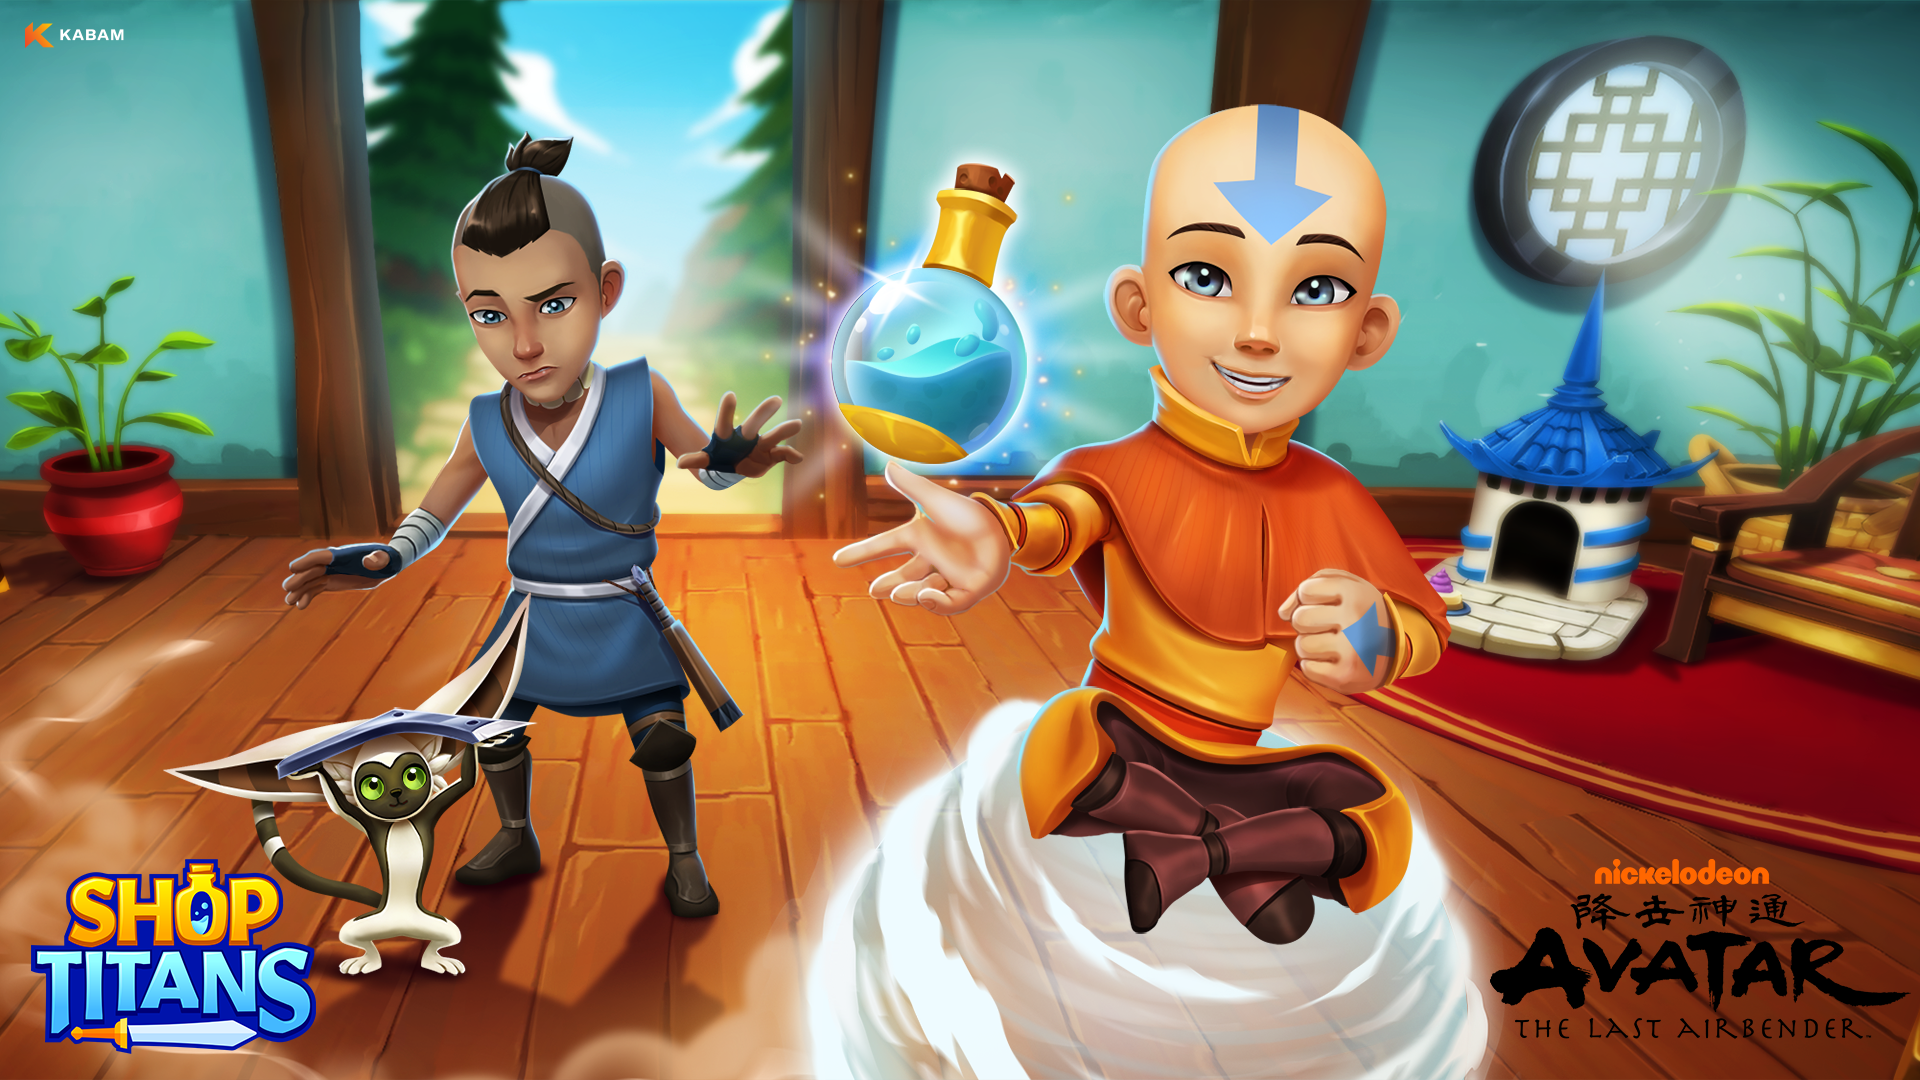 Kabam And Nickelodeon Team Up For Avatar The Last Airbender Special  Event In Shop Titans  COMICON